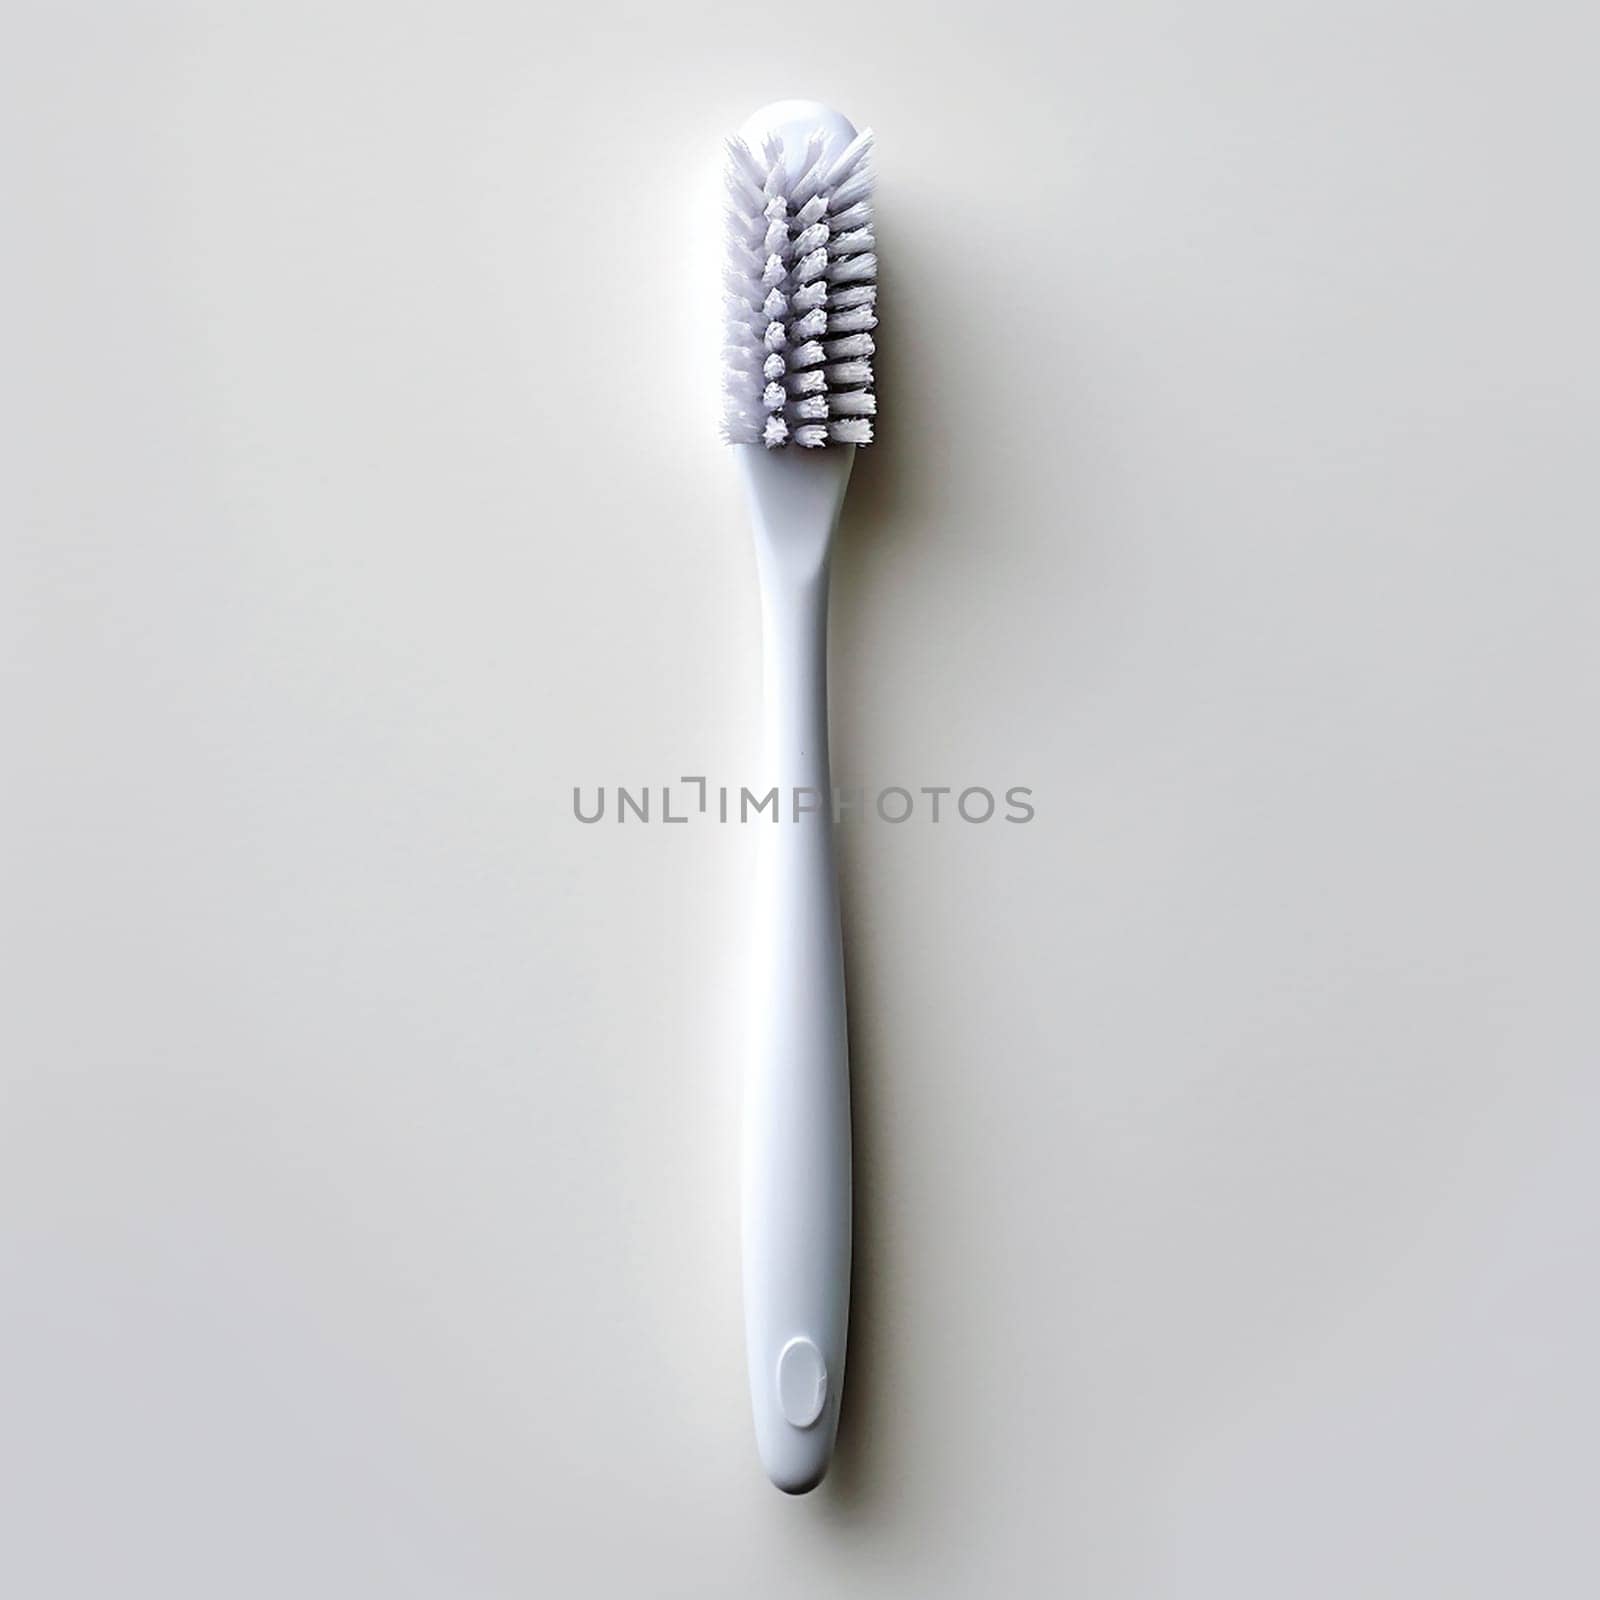 A single white toothbrush against a plain background.